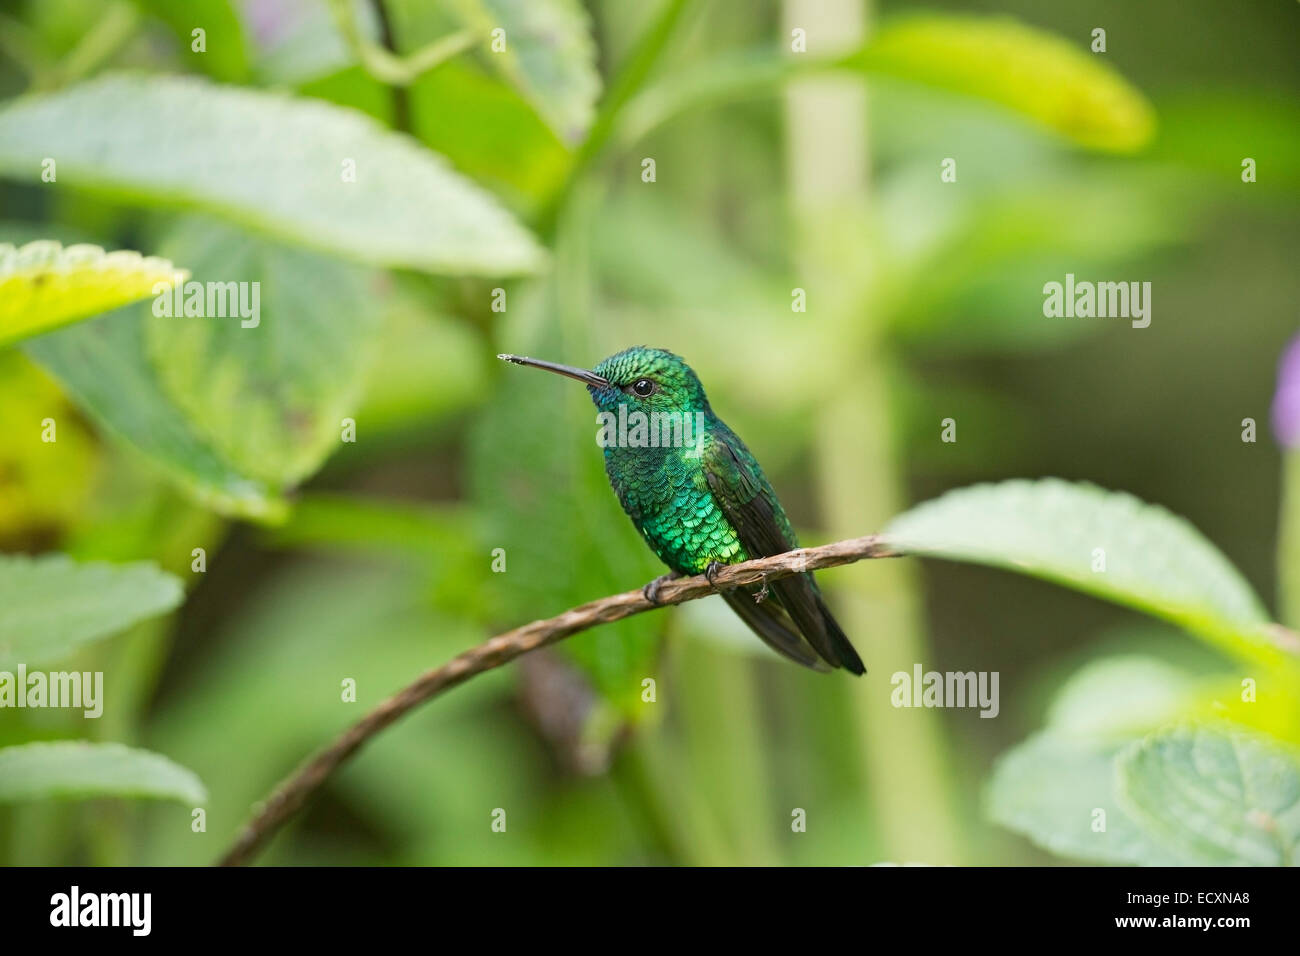 blue-chinned sapphire hummingbird (Chlorestes notatus) single adult male perched on vegetation. Stock Photo